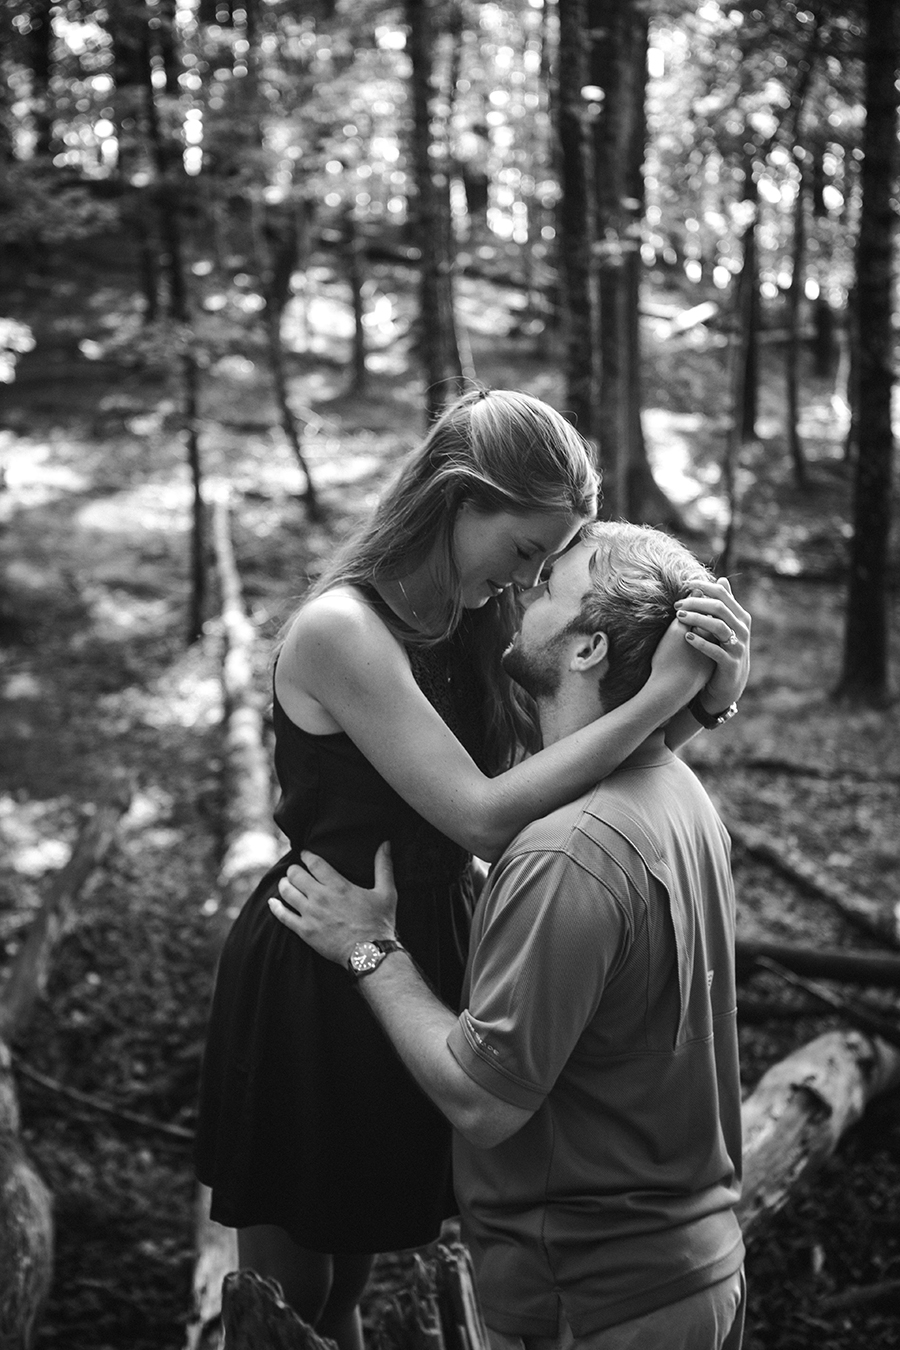 Her hands cupping his head engagement photo by Knoxville Wedding Photographer, Amanda May Photos.